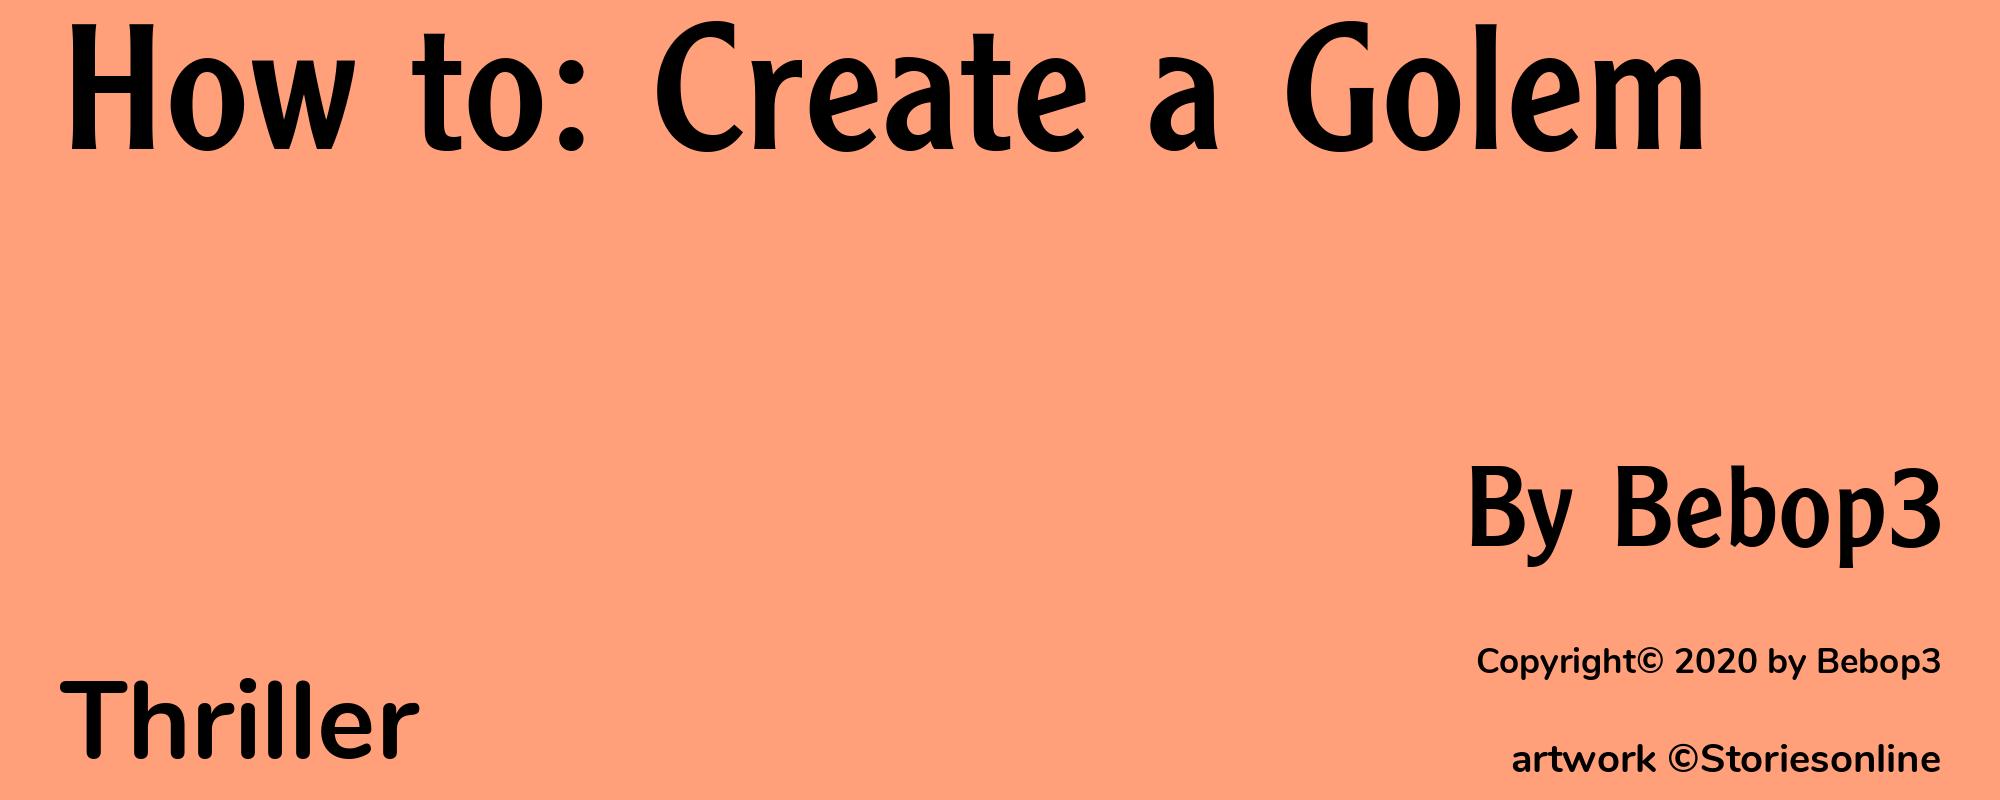 How to: Create a Golem - Cover